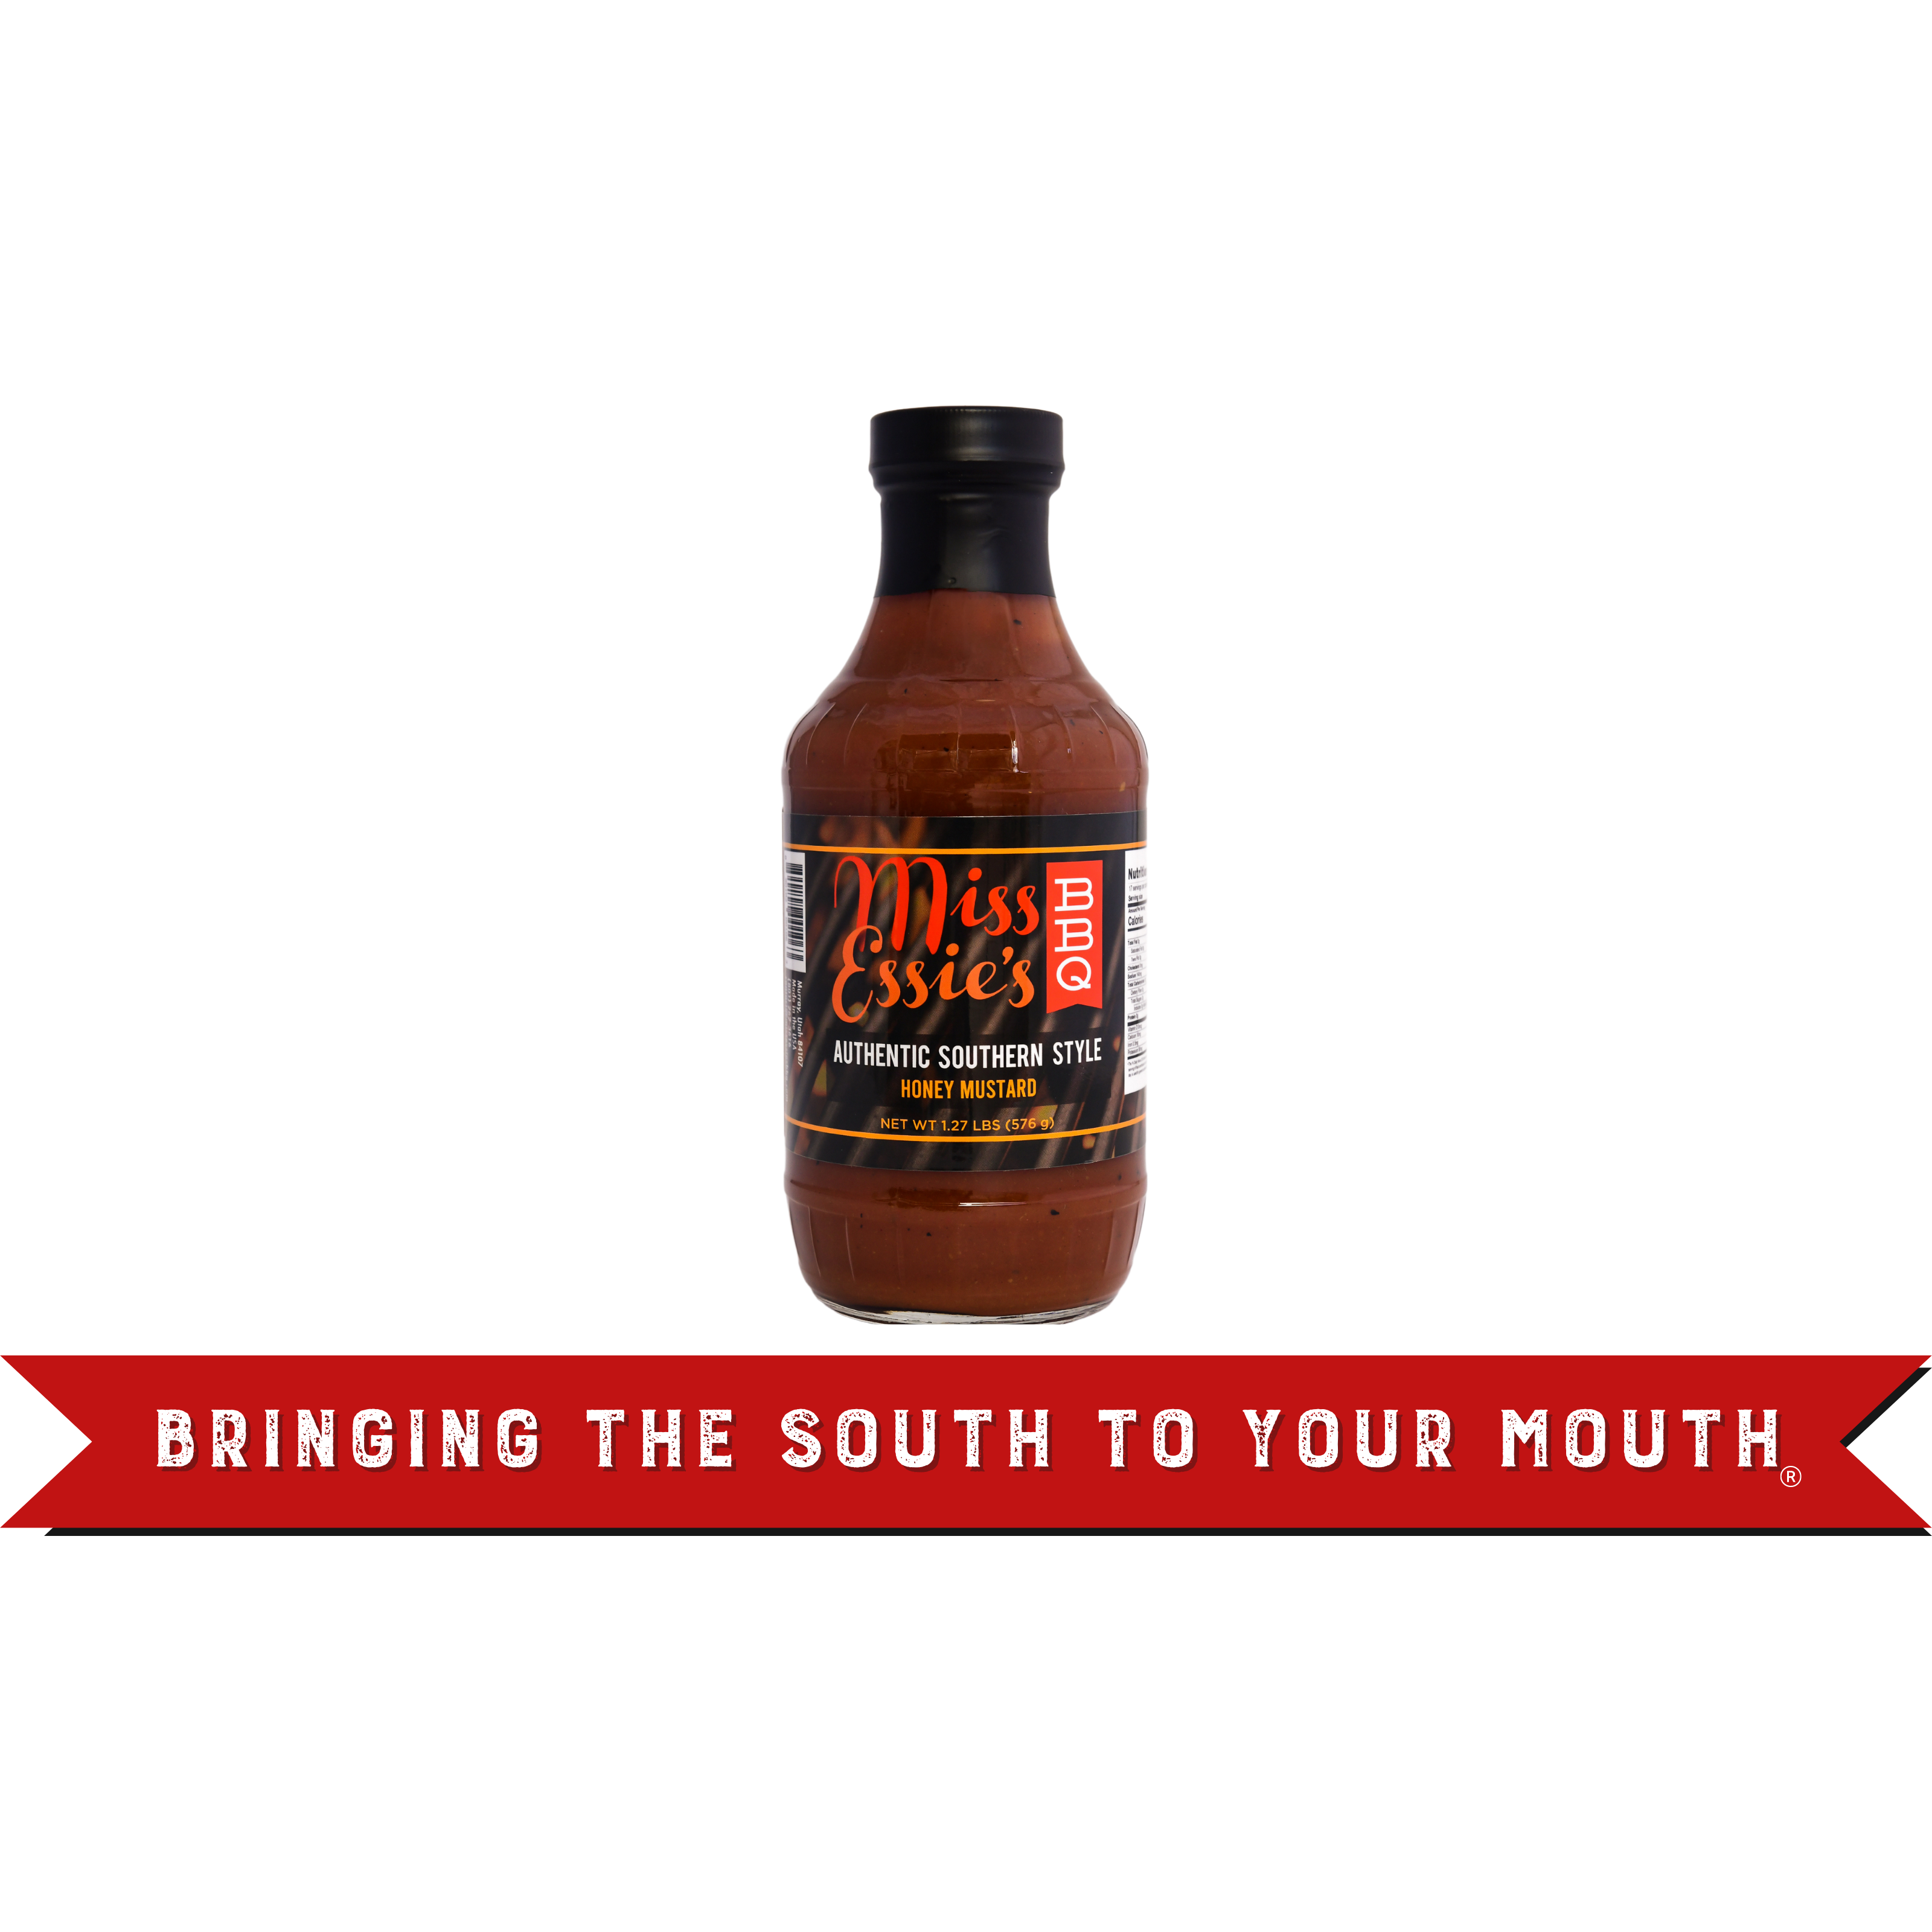 Suckle Busters Honey BBQ Glaze Finishing Sauce – InsideOut